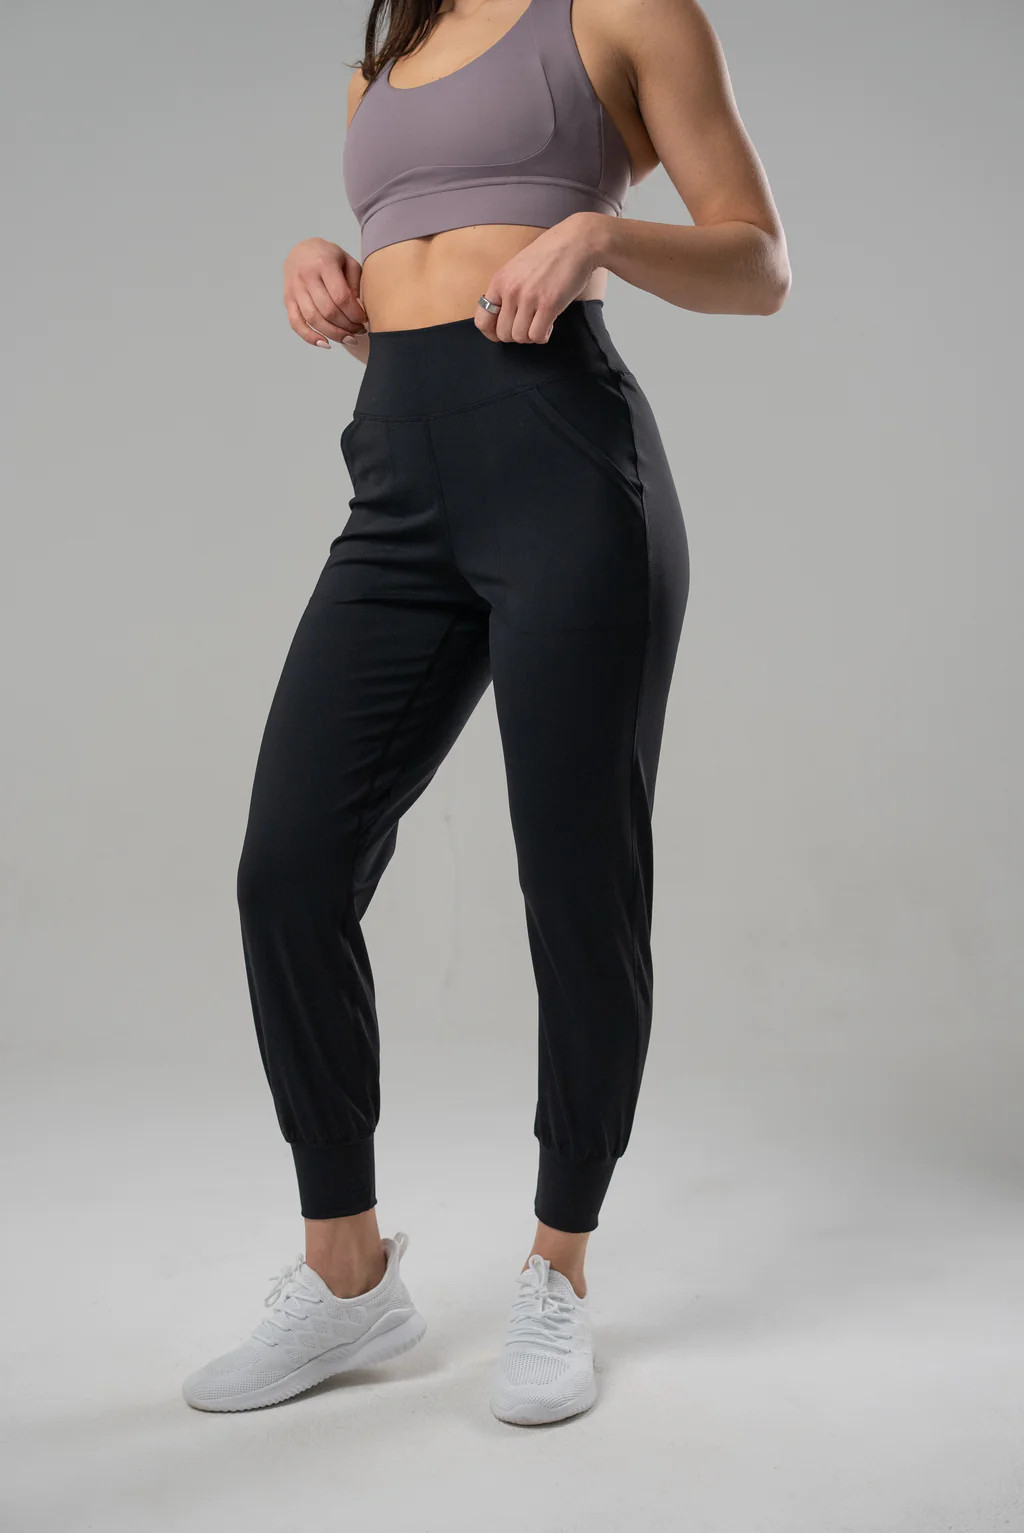 resilient gravity joggers 25" | Alyth Active